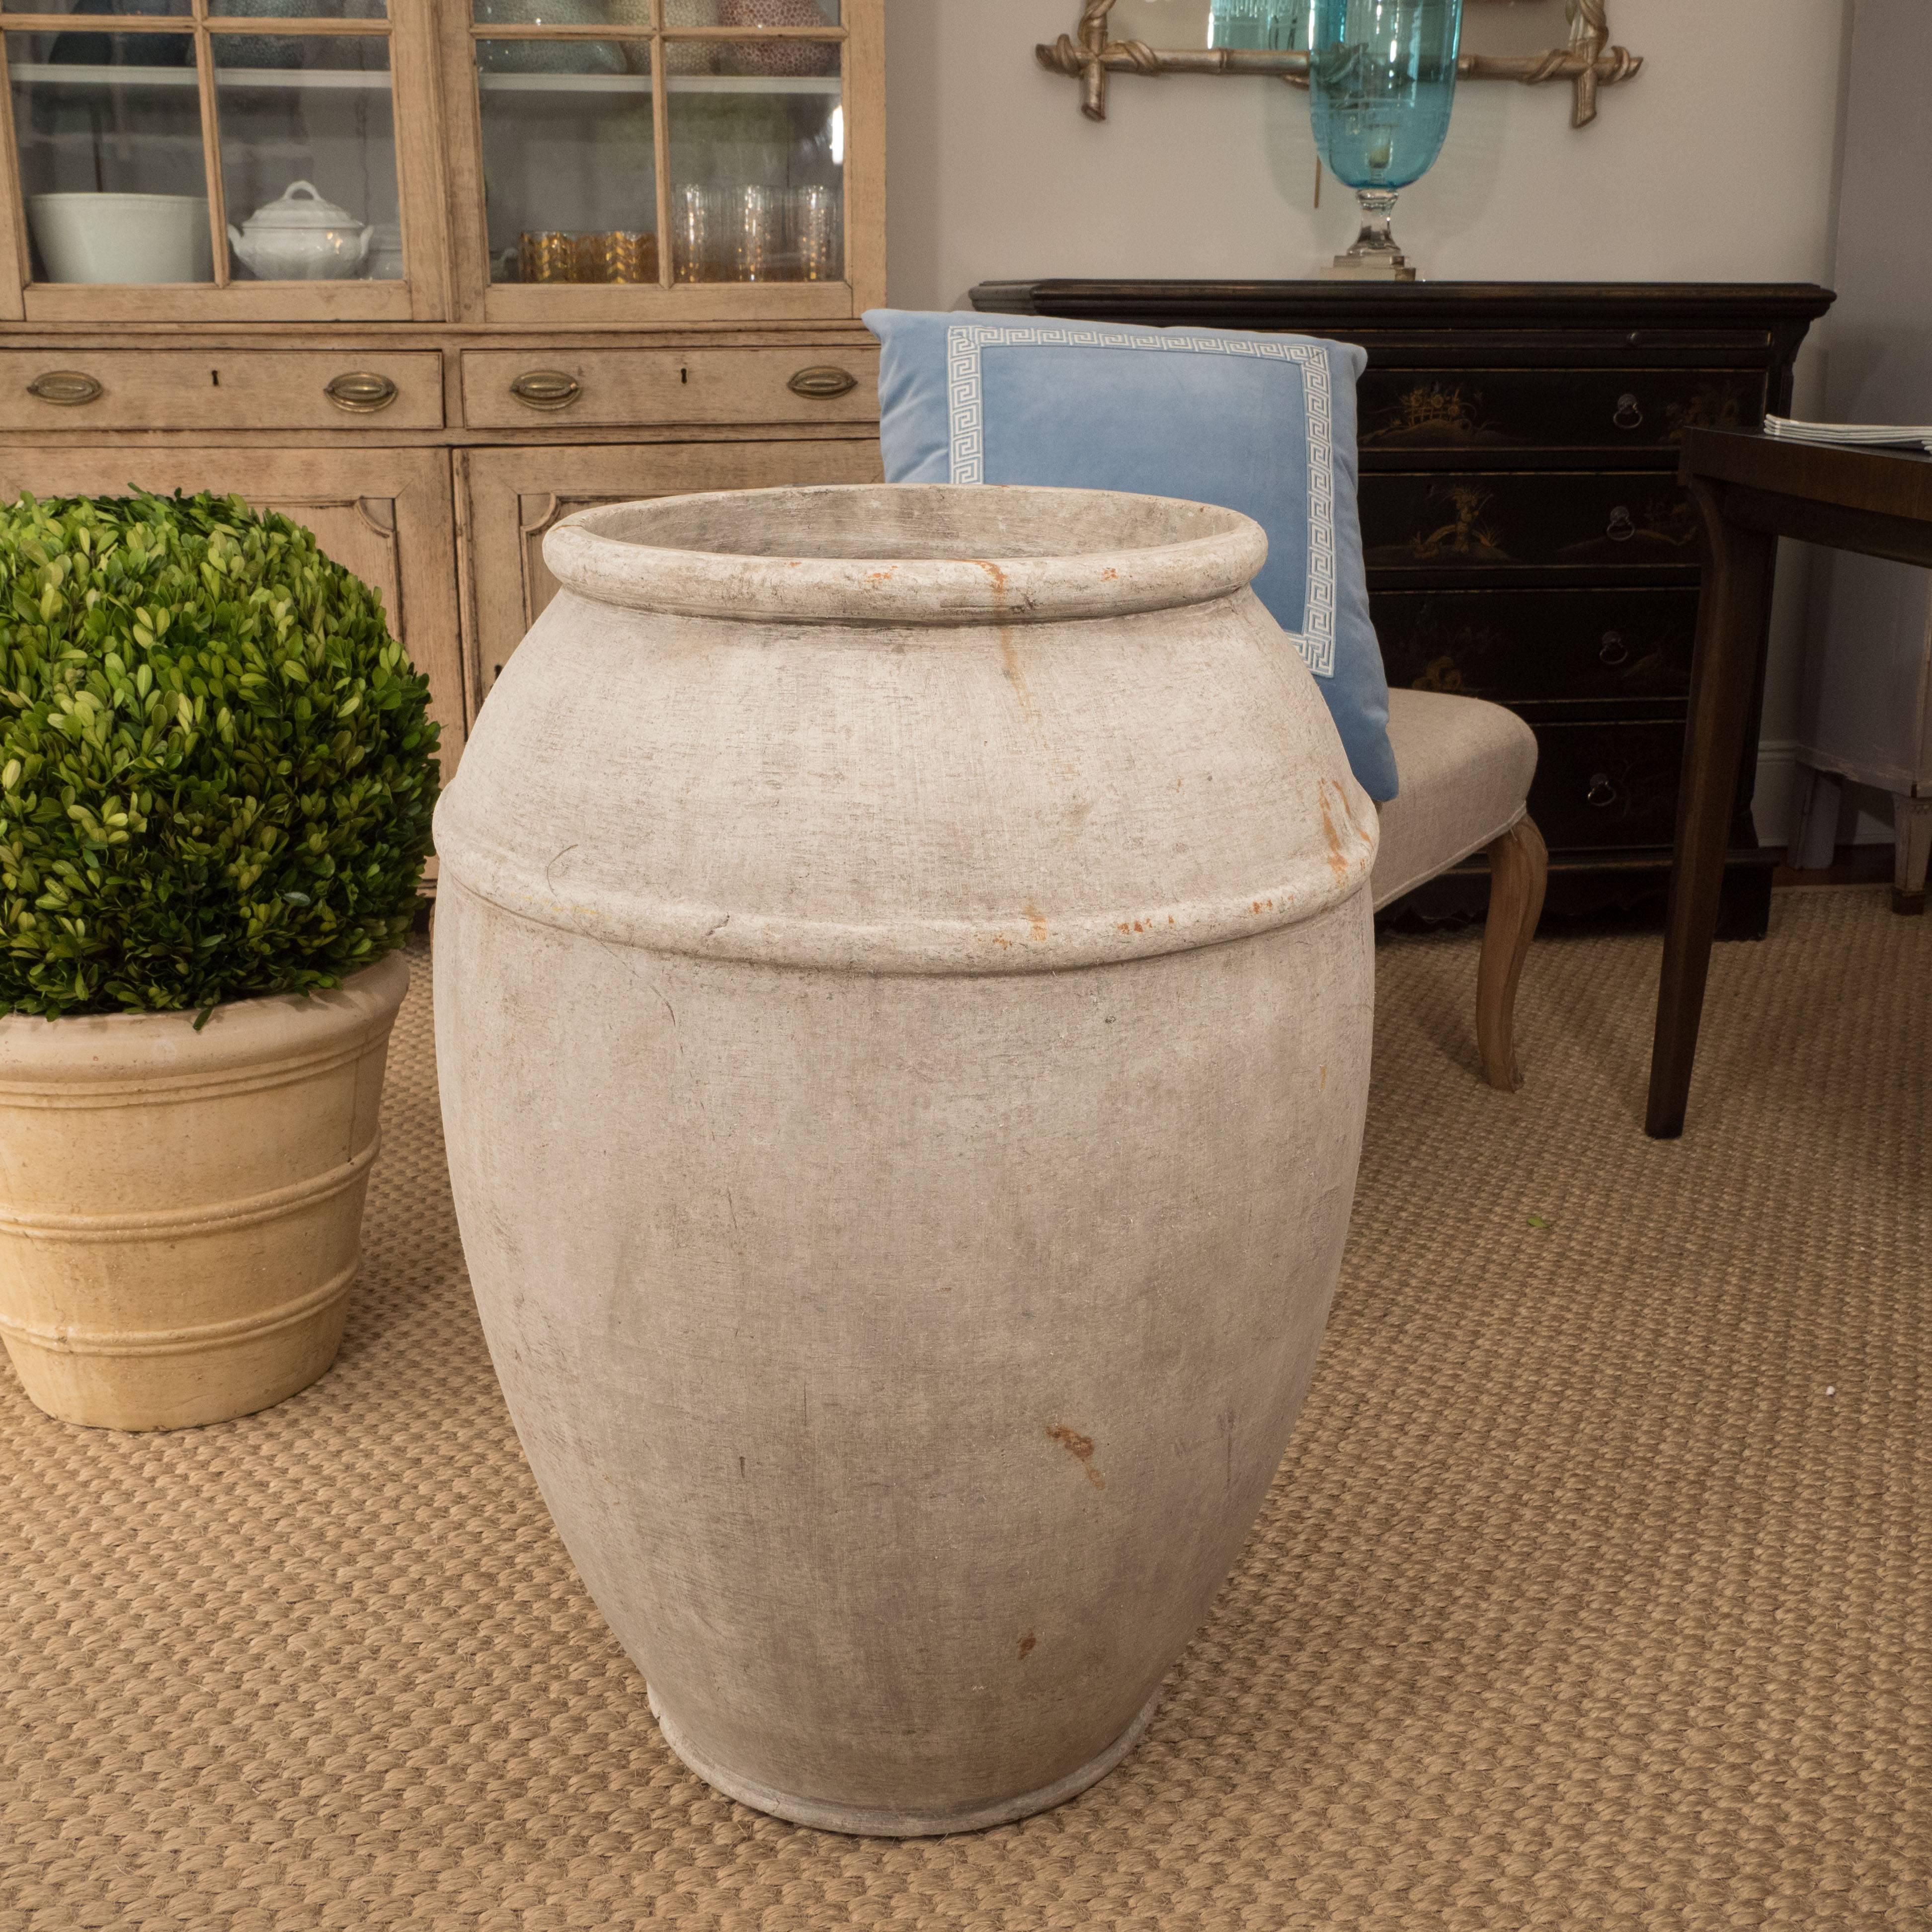 Its graceful shape gives this large cement urn a quiet elegance. Inside or out, this piece would look great with plantings or without.